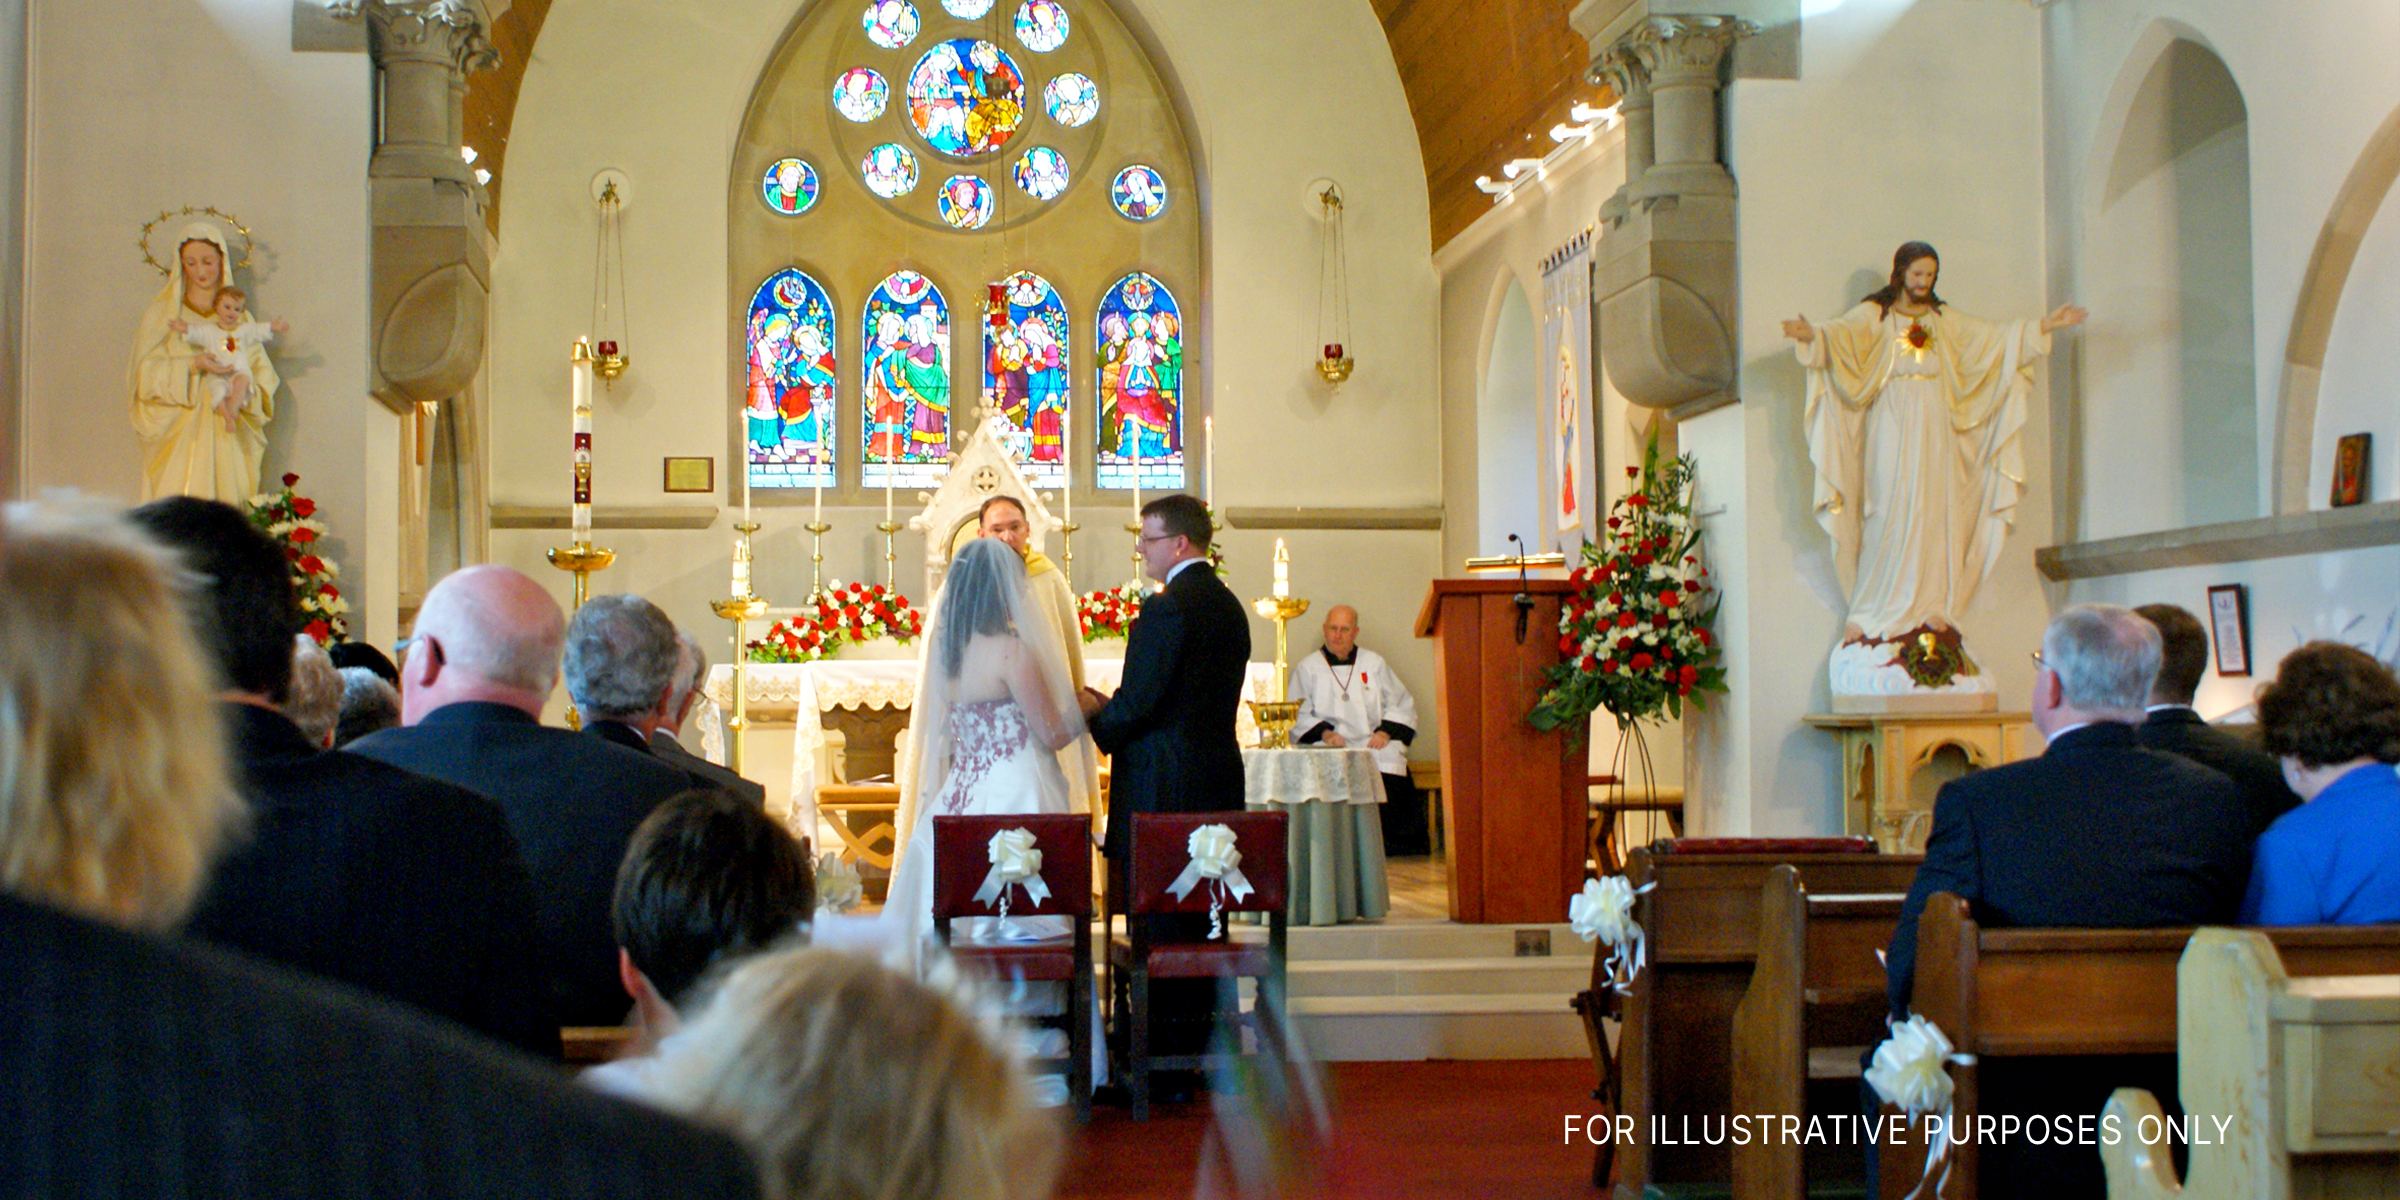 Couple at altar in church | Source: Flickr